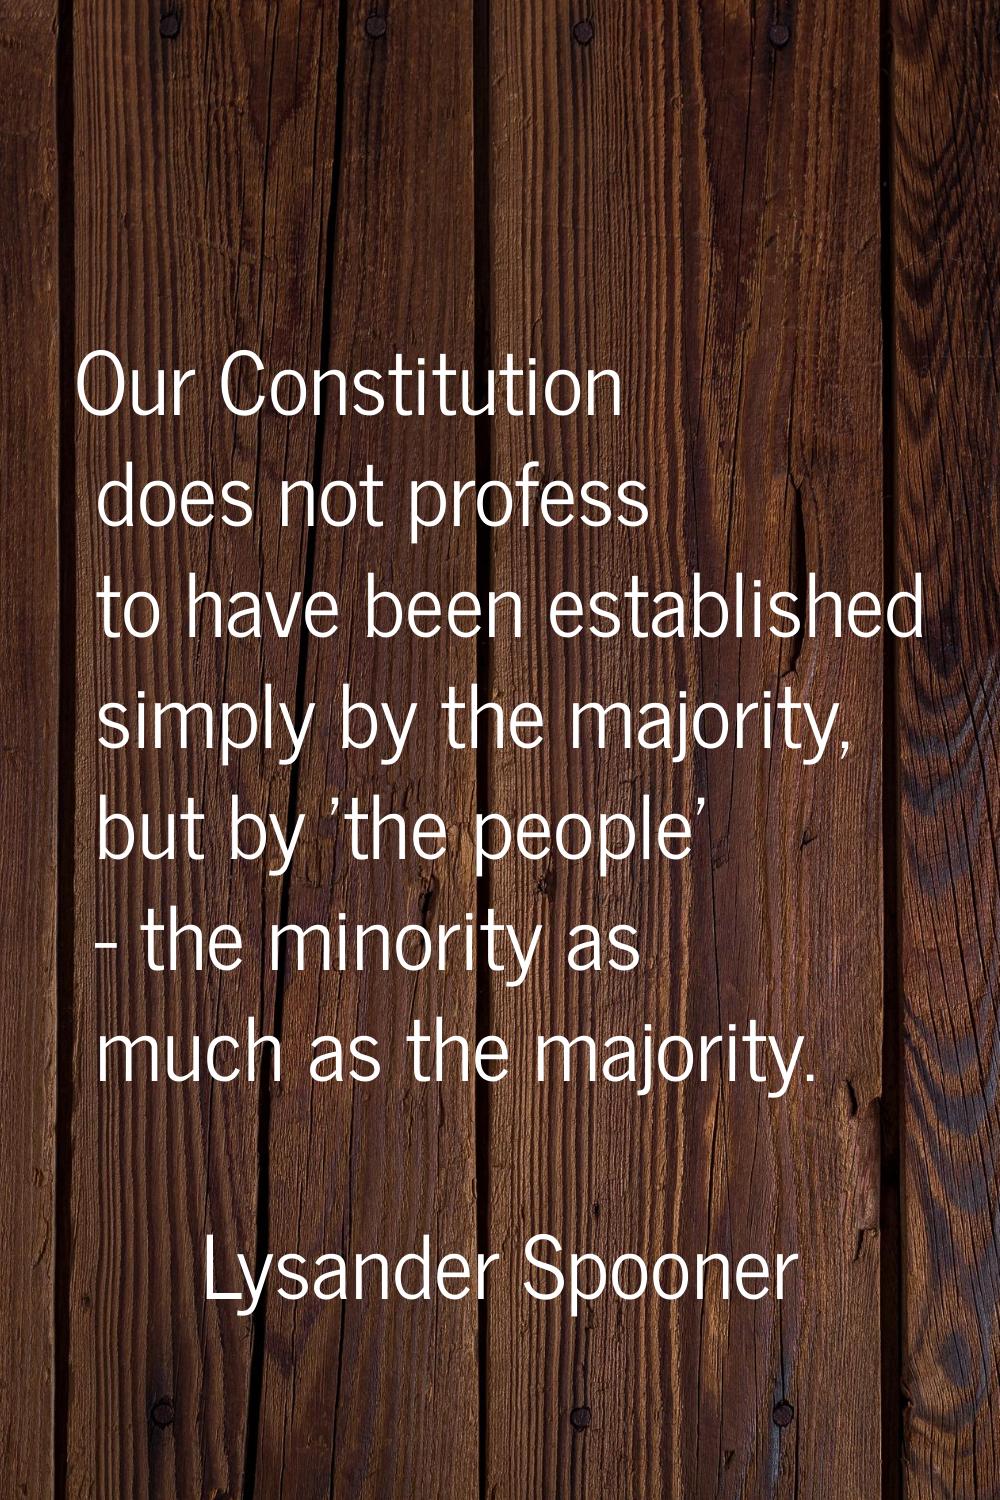 Our Constitution does not profess to have been established simply by the majority, but by 'the peop